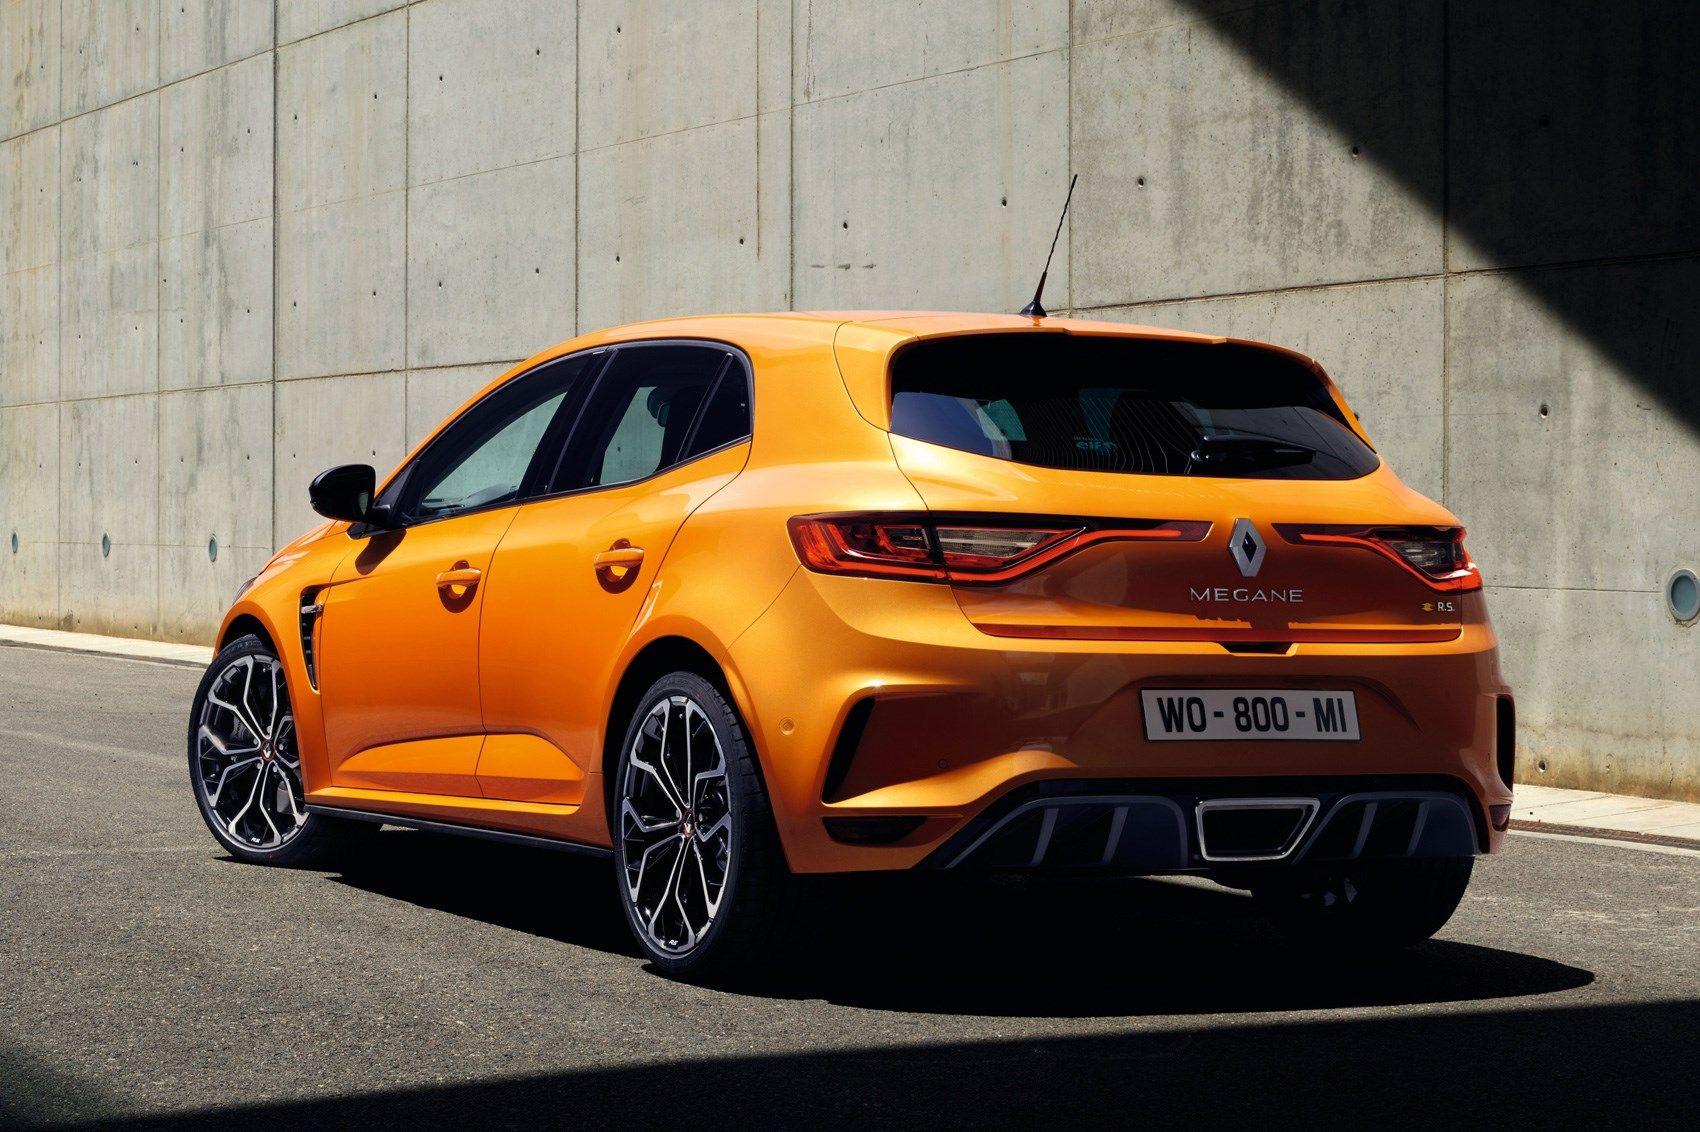 New 2018 Renault Megane RS: price, performance, specs and more